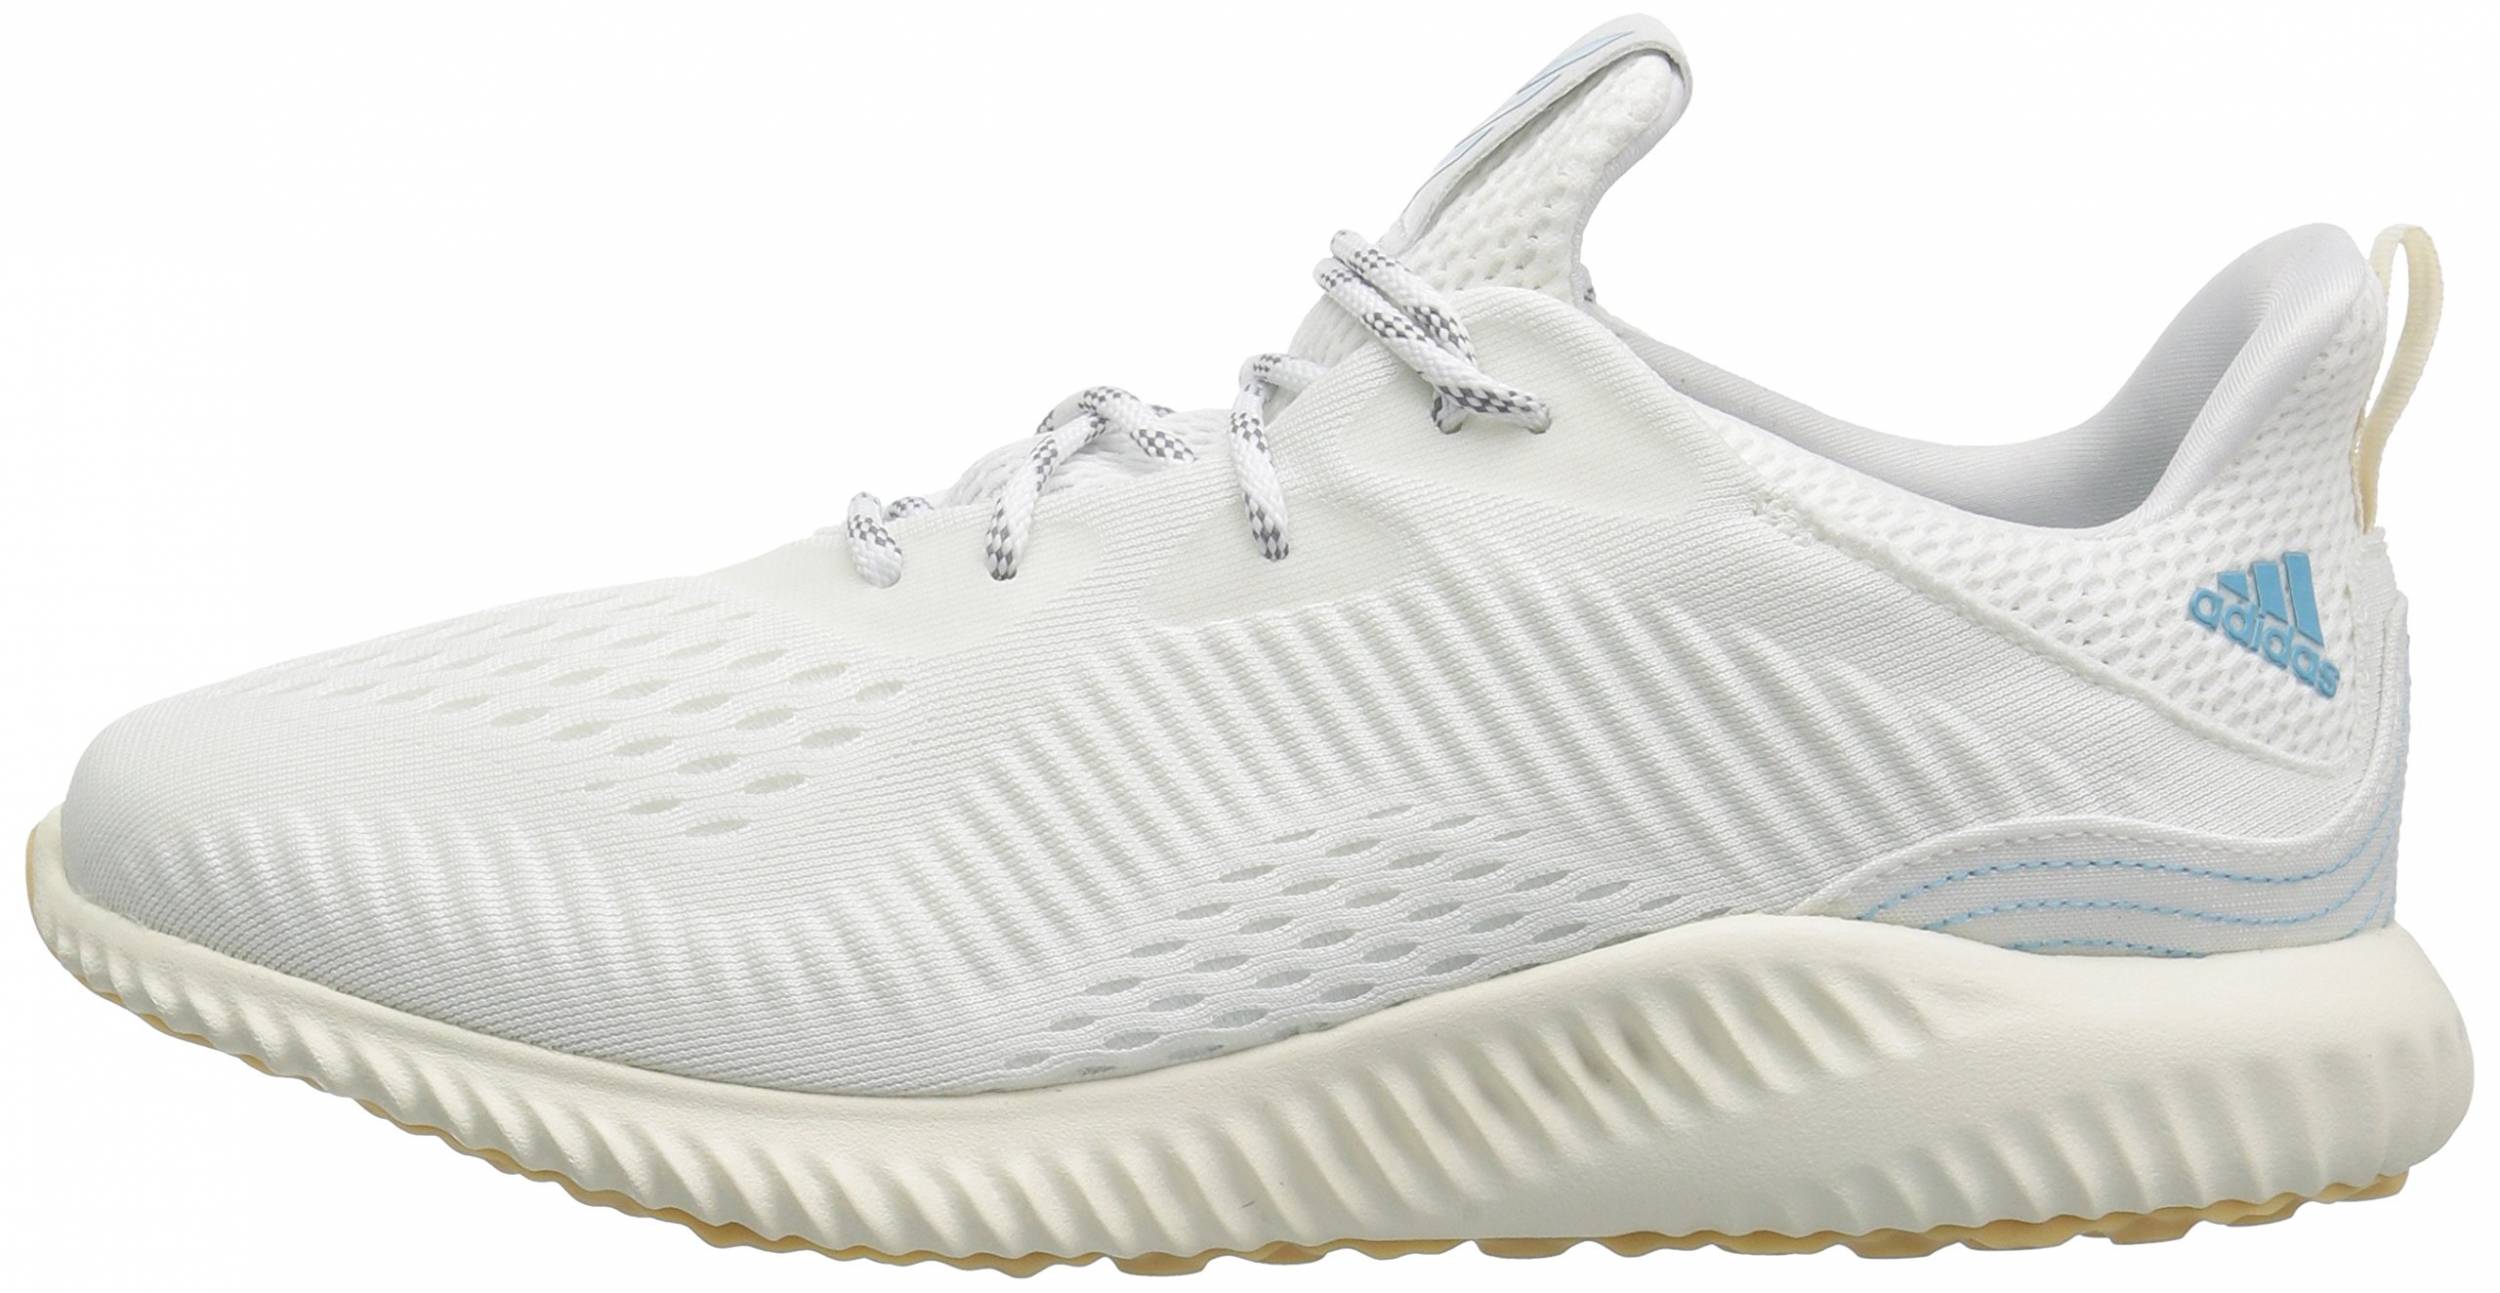 Review of Adidas Alphabounce Parley 